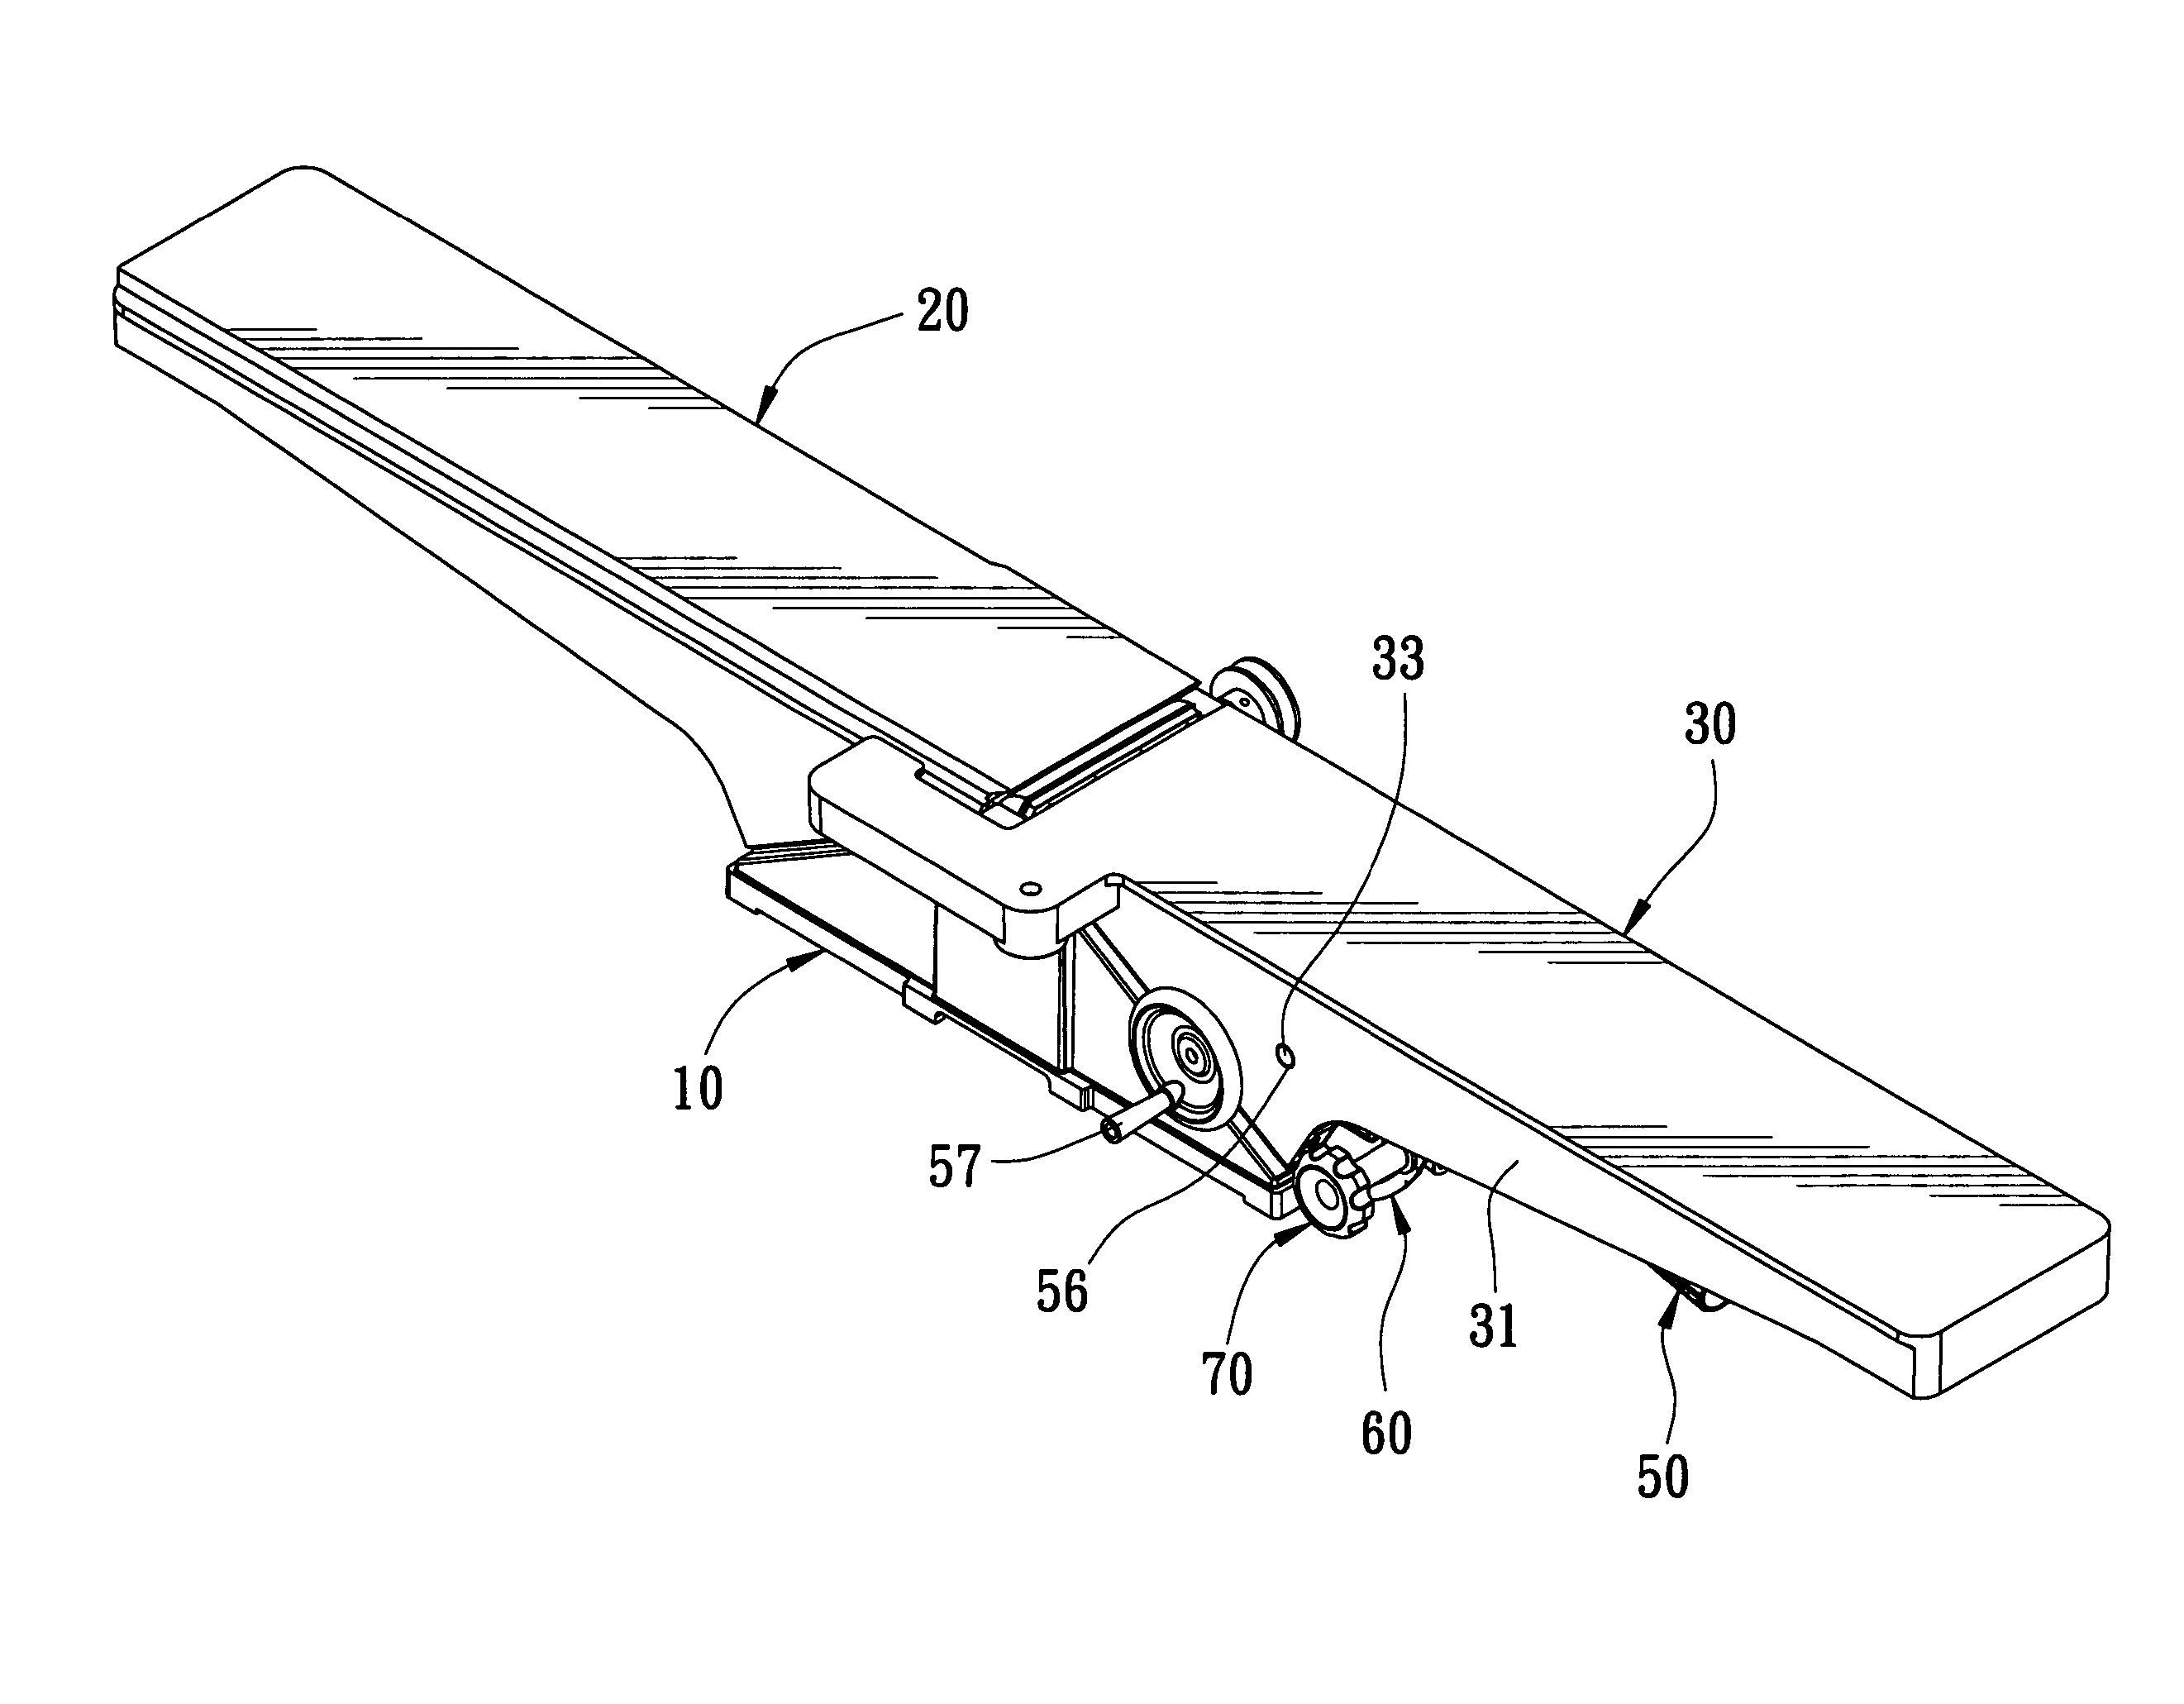 Swiftly and minutely adjusting device for a wood-planer working table